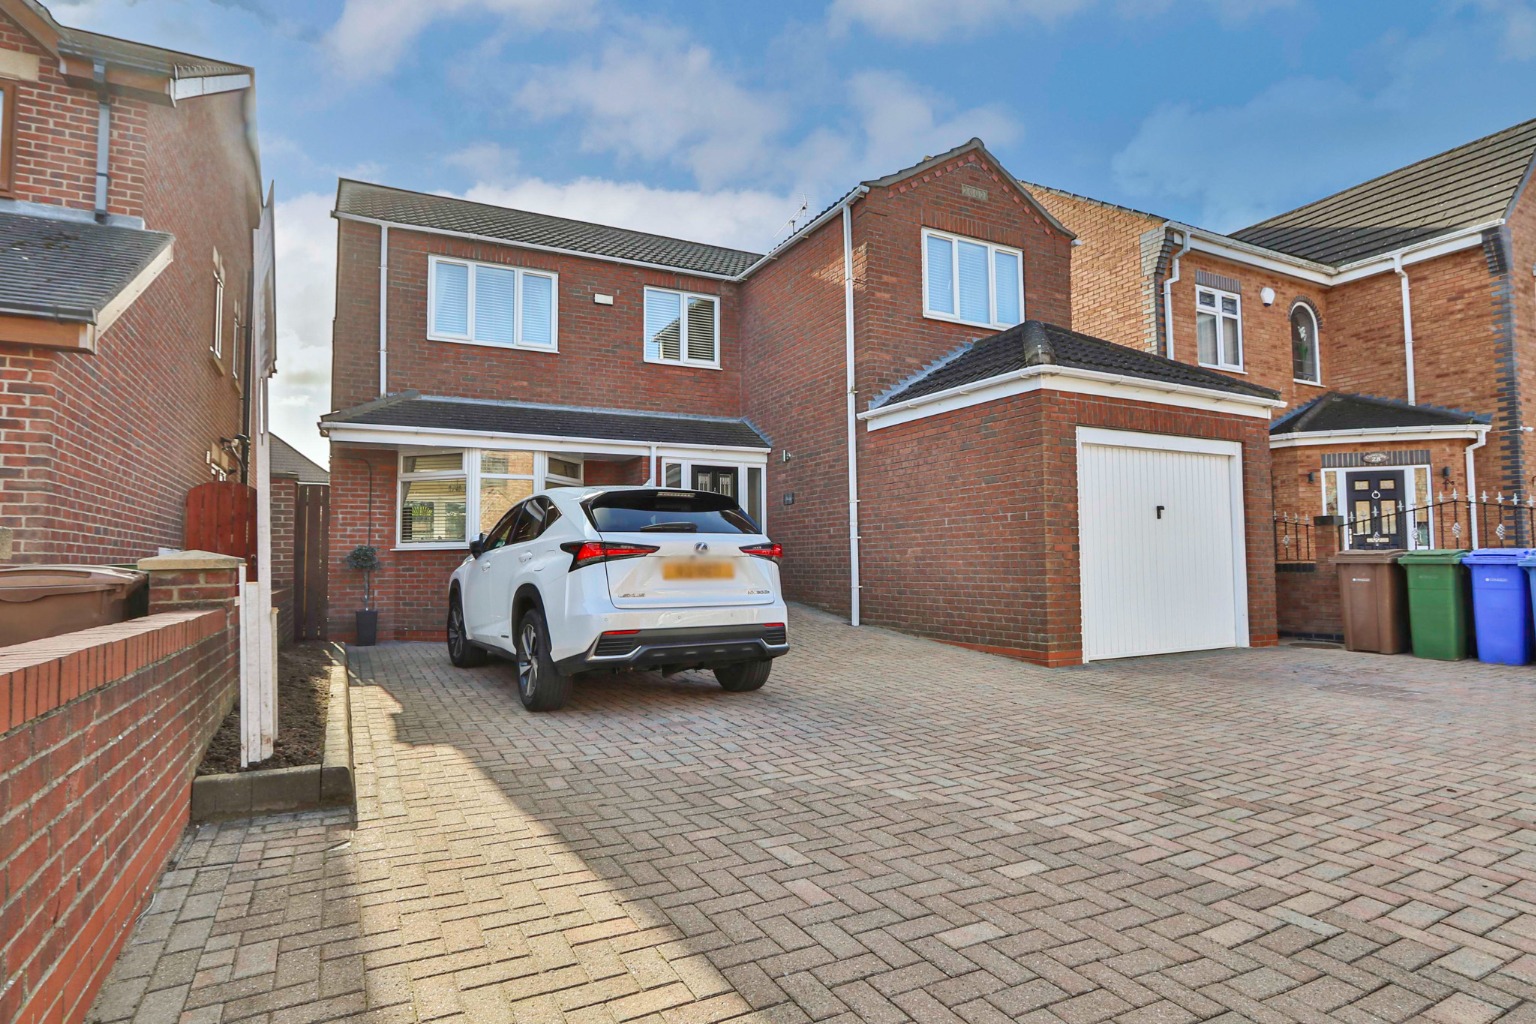 4 bed detached house for sale - Property Image 1